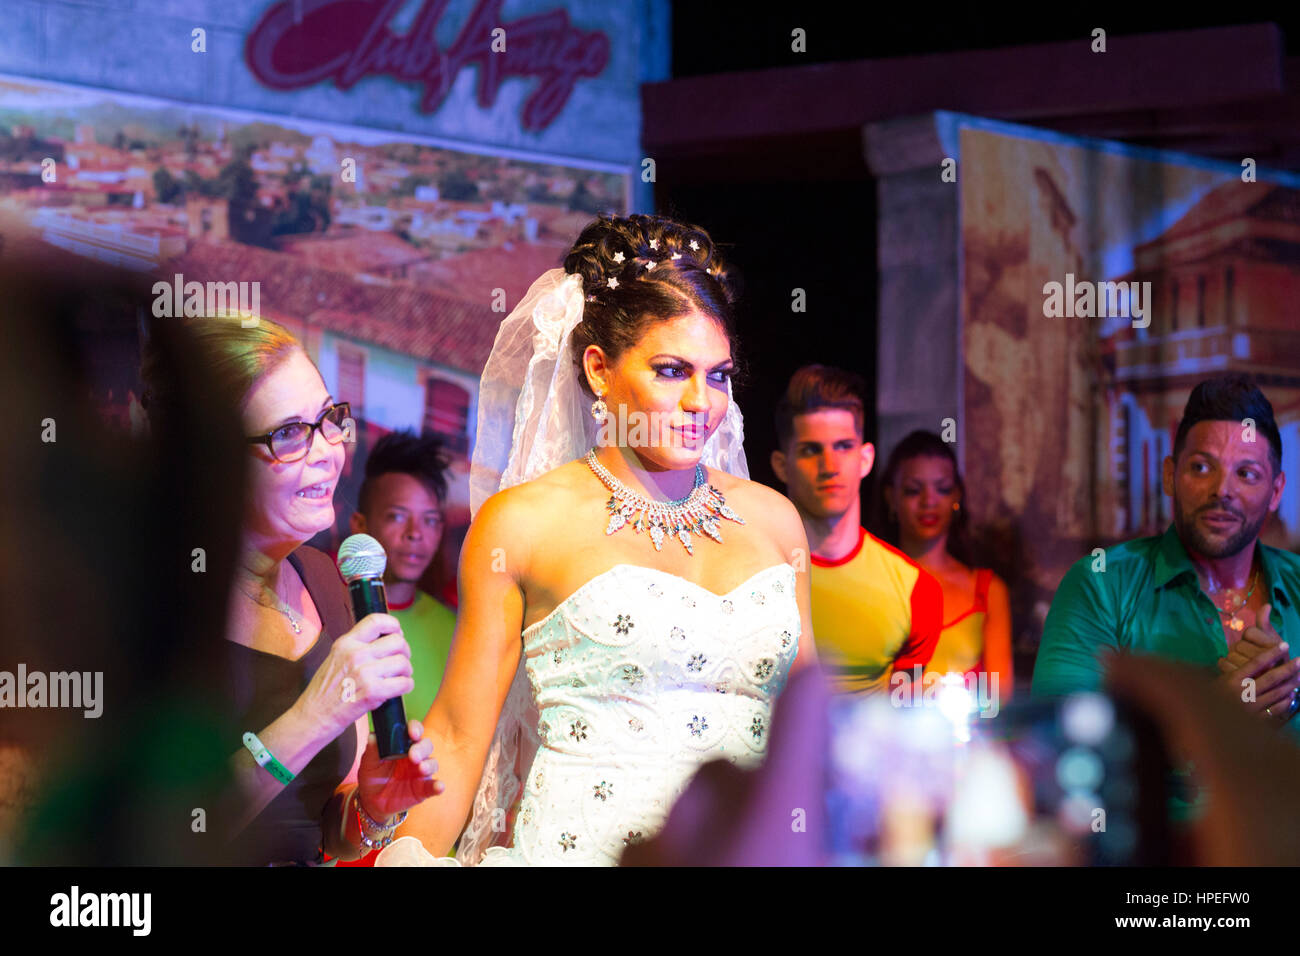 Wedding ceremony of Cuban transgender woman, Malu Cano, a transgender rights advocate, that took place during Transgender educational & advocacy weeke Stock Photo